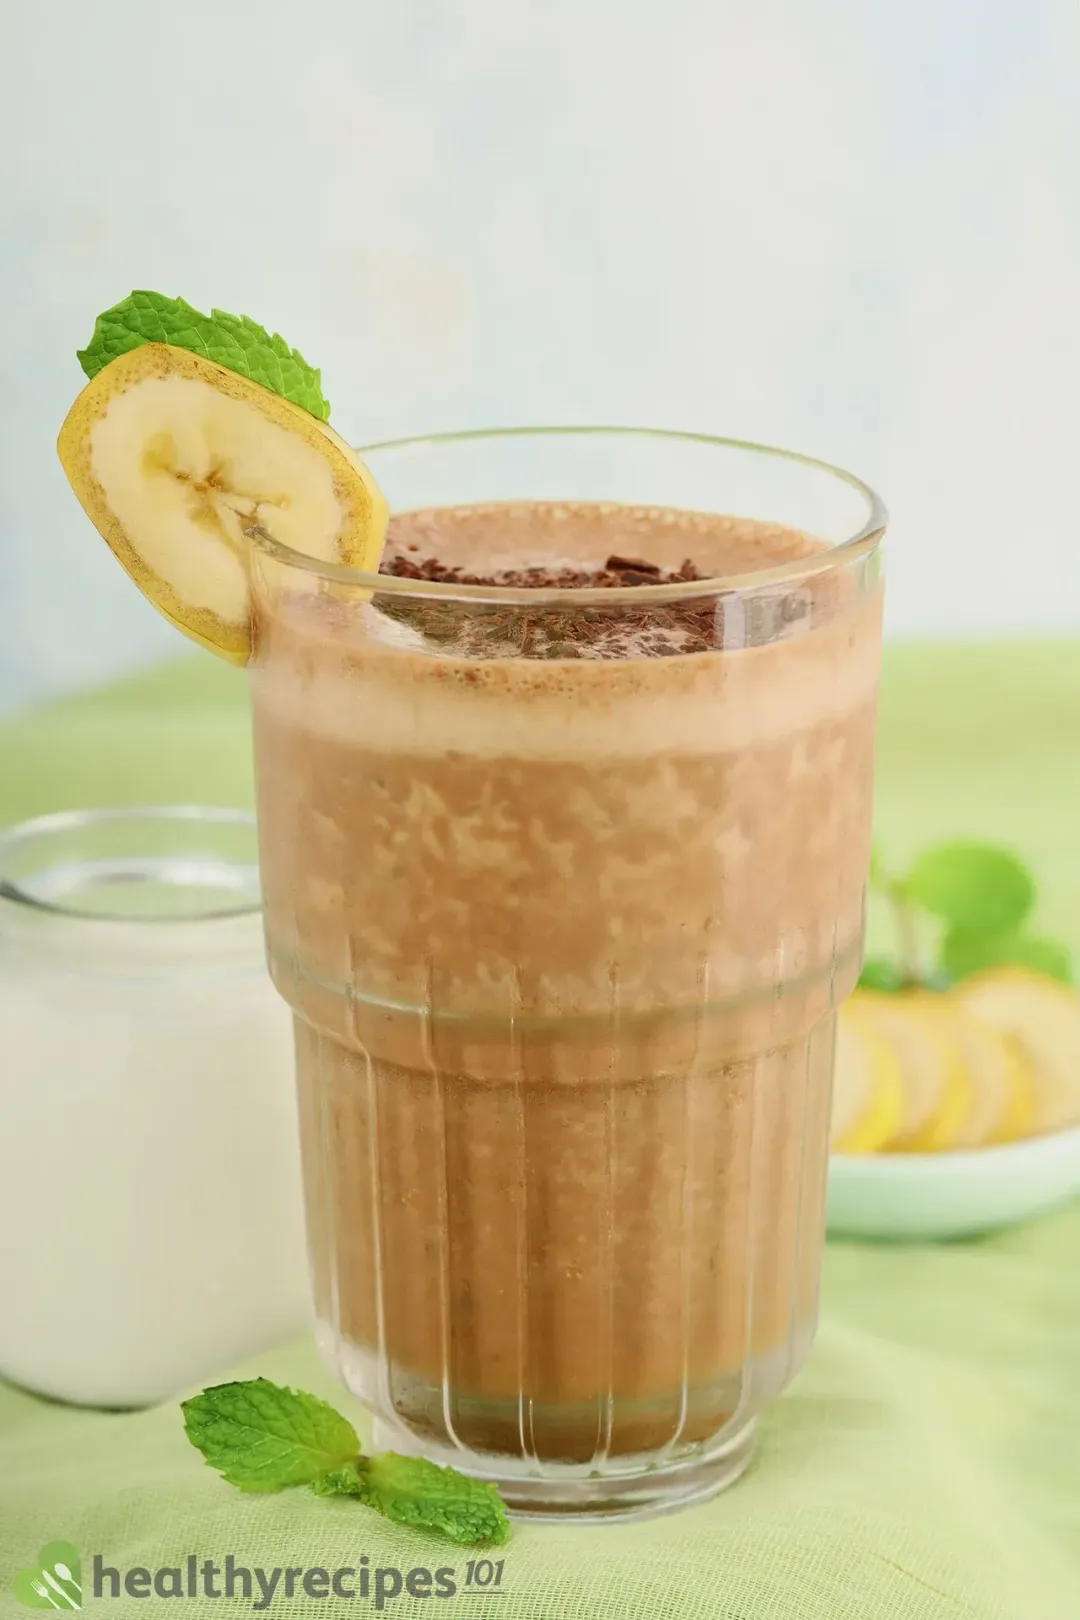 Is This Chocolate Smoothie Healthy